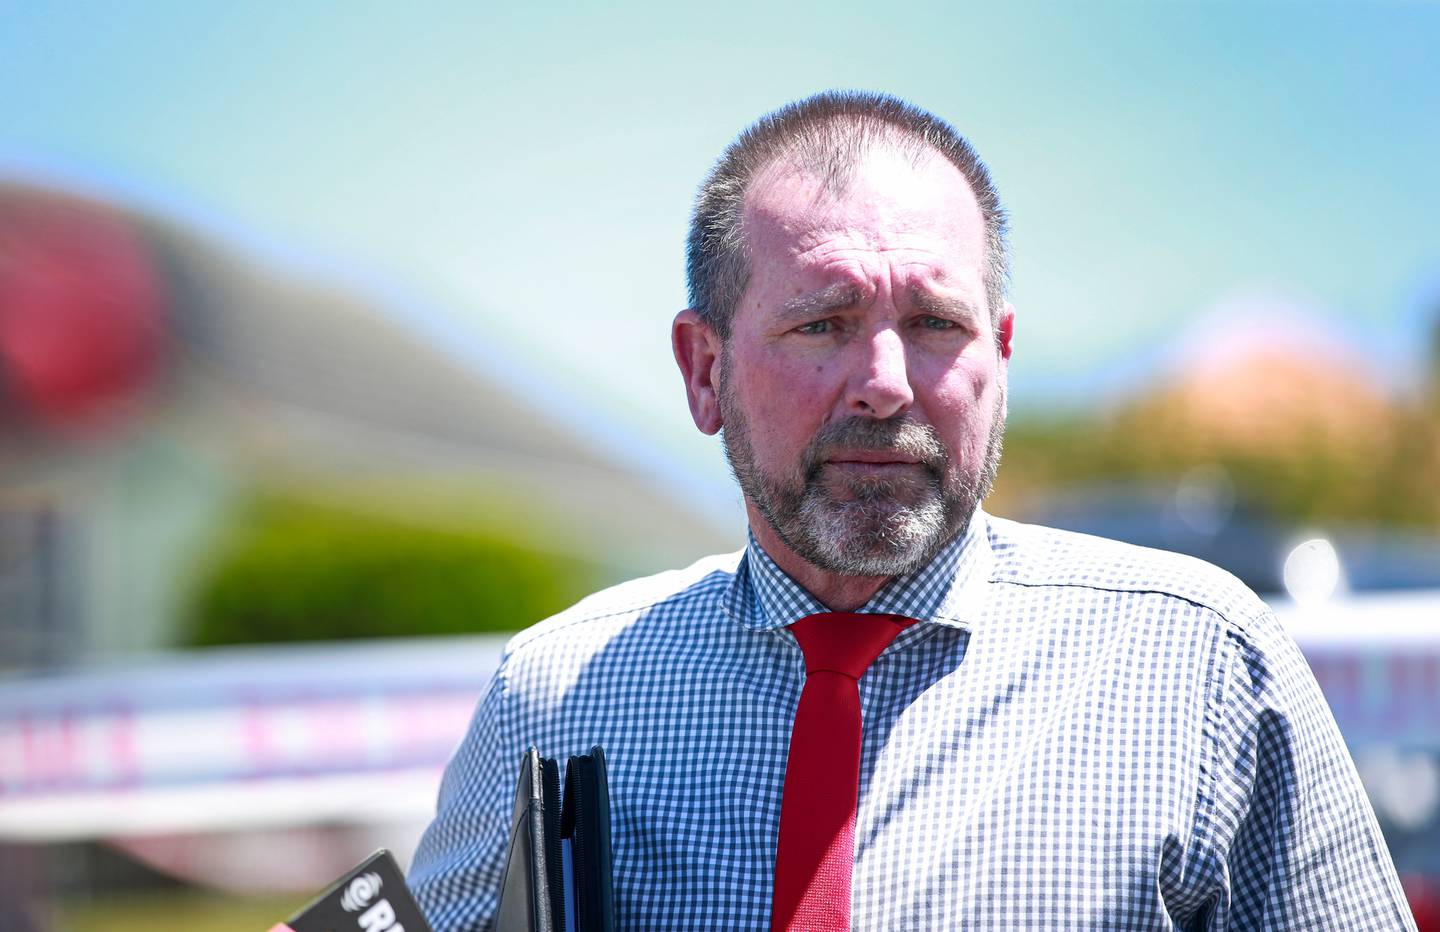 Auckland Detective Inspector Scott Beard warned staff members against engaging with offenders. Photo / Alex Burton